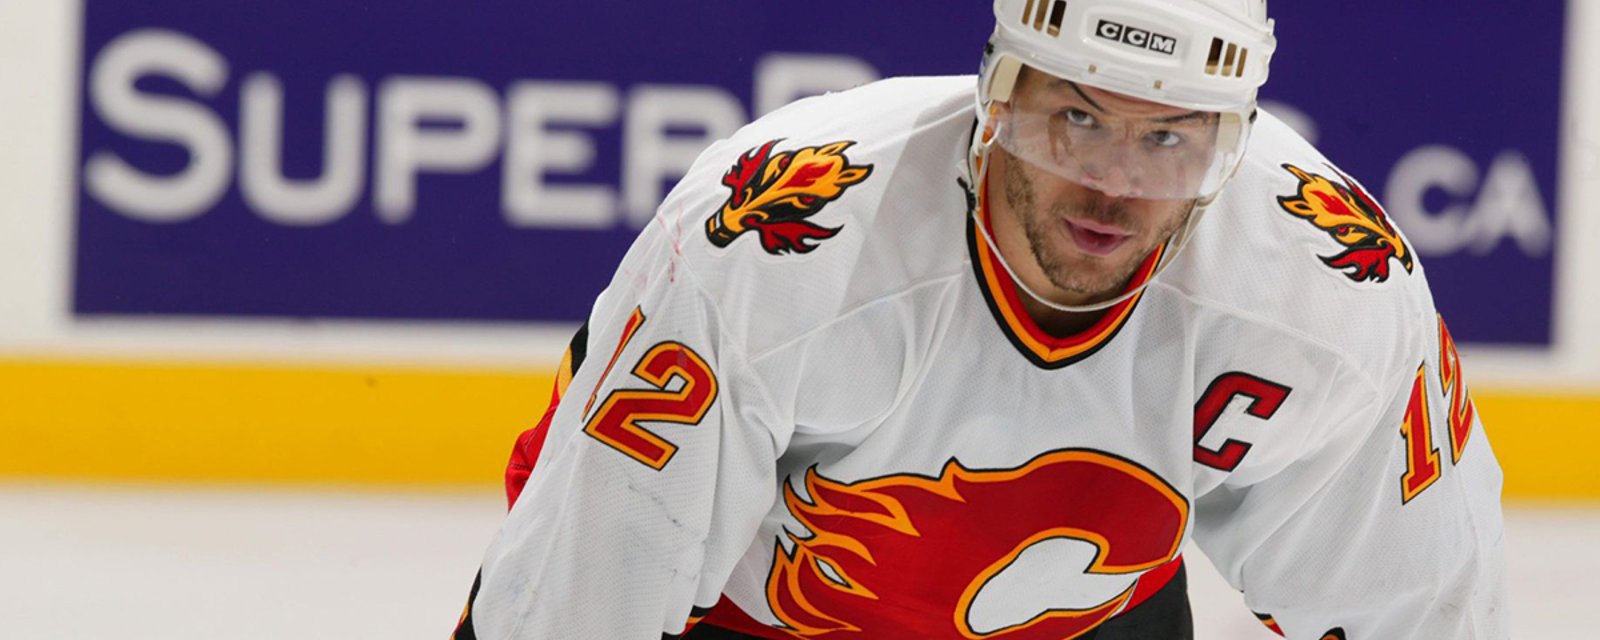 Breaking: Flames announce jersey retirement for legend Jarome Iginla 